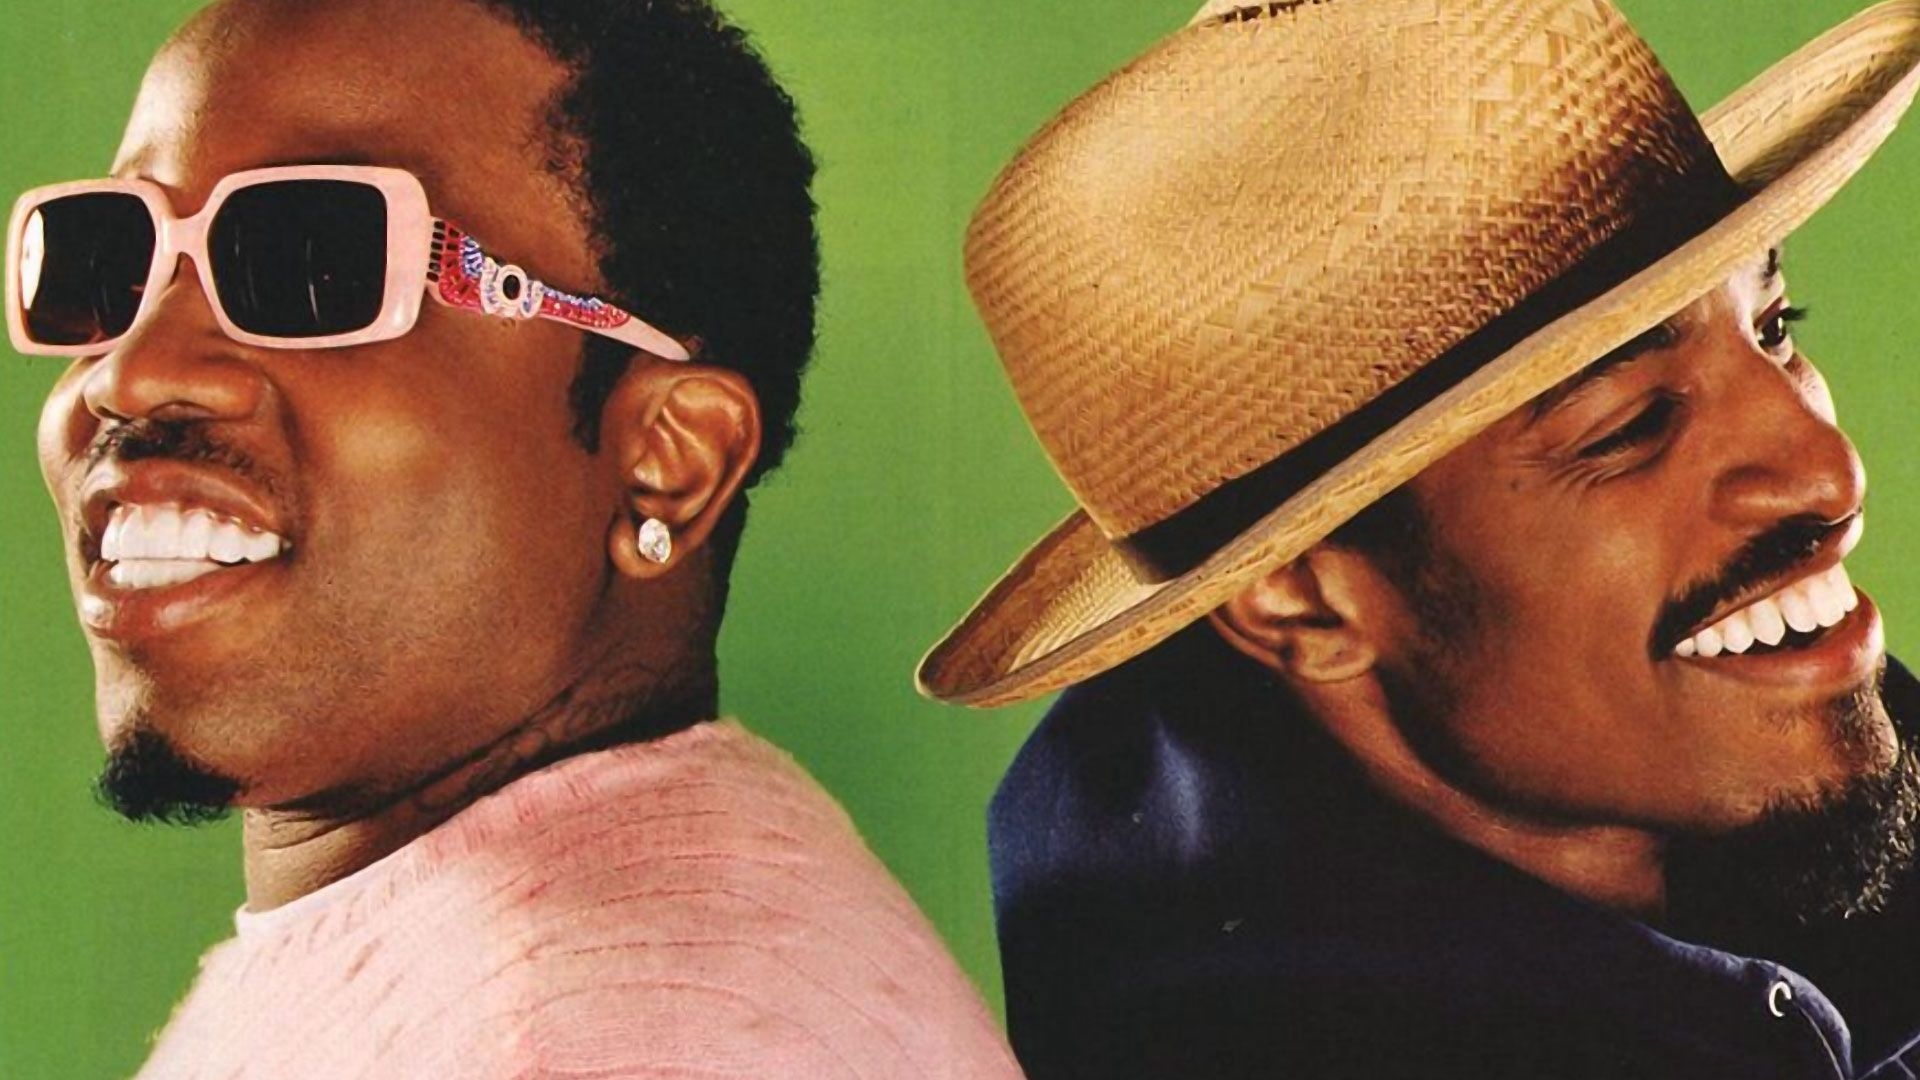 OutKast Wallpapers - Top Free OutKast Backgrounds 1920x1080